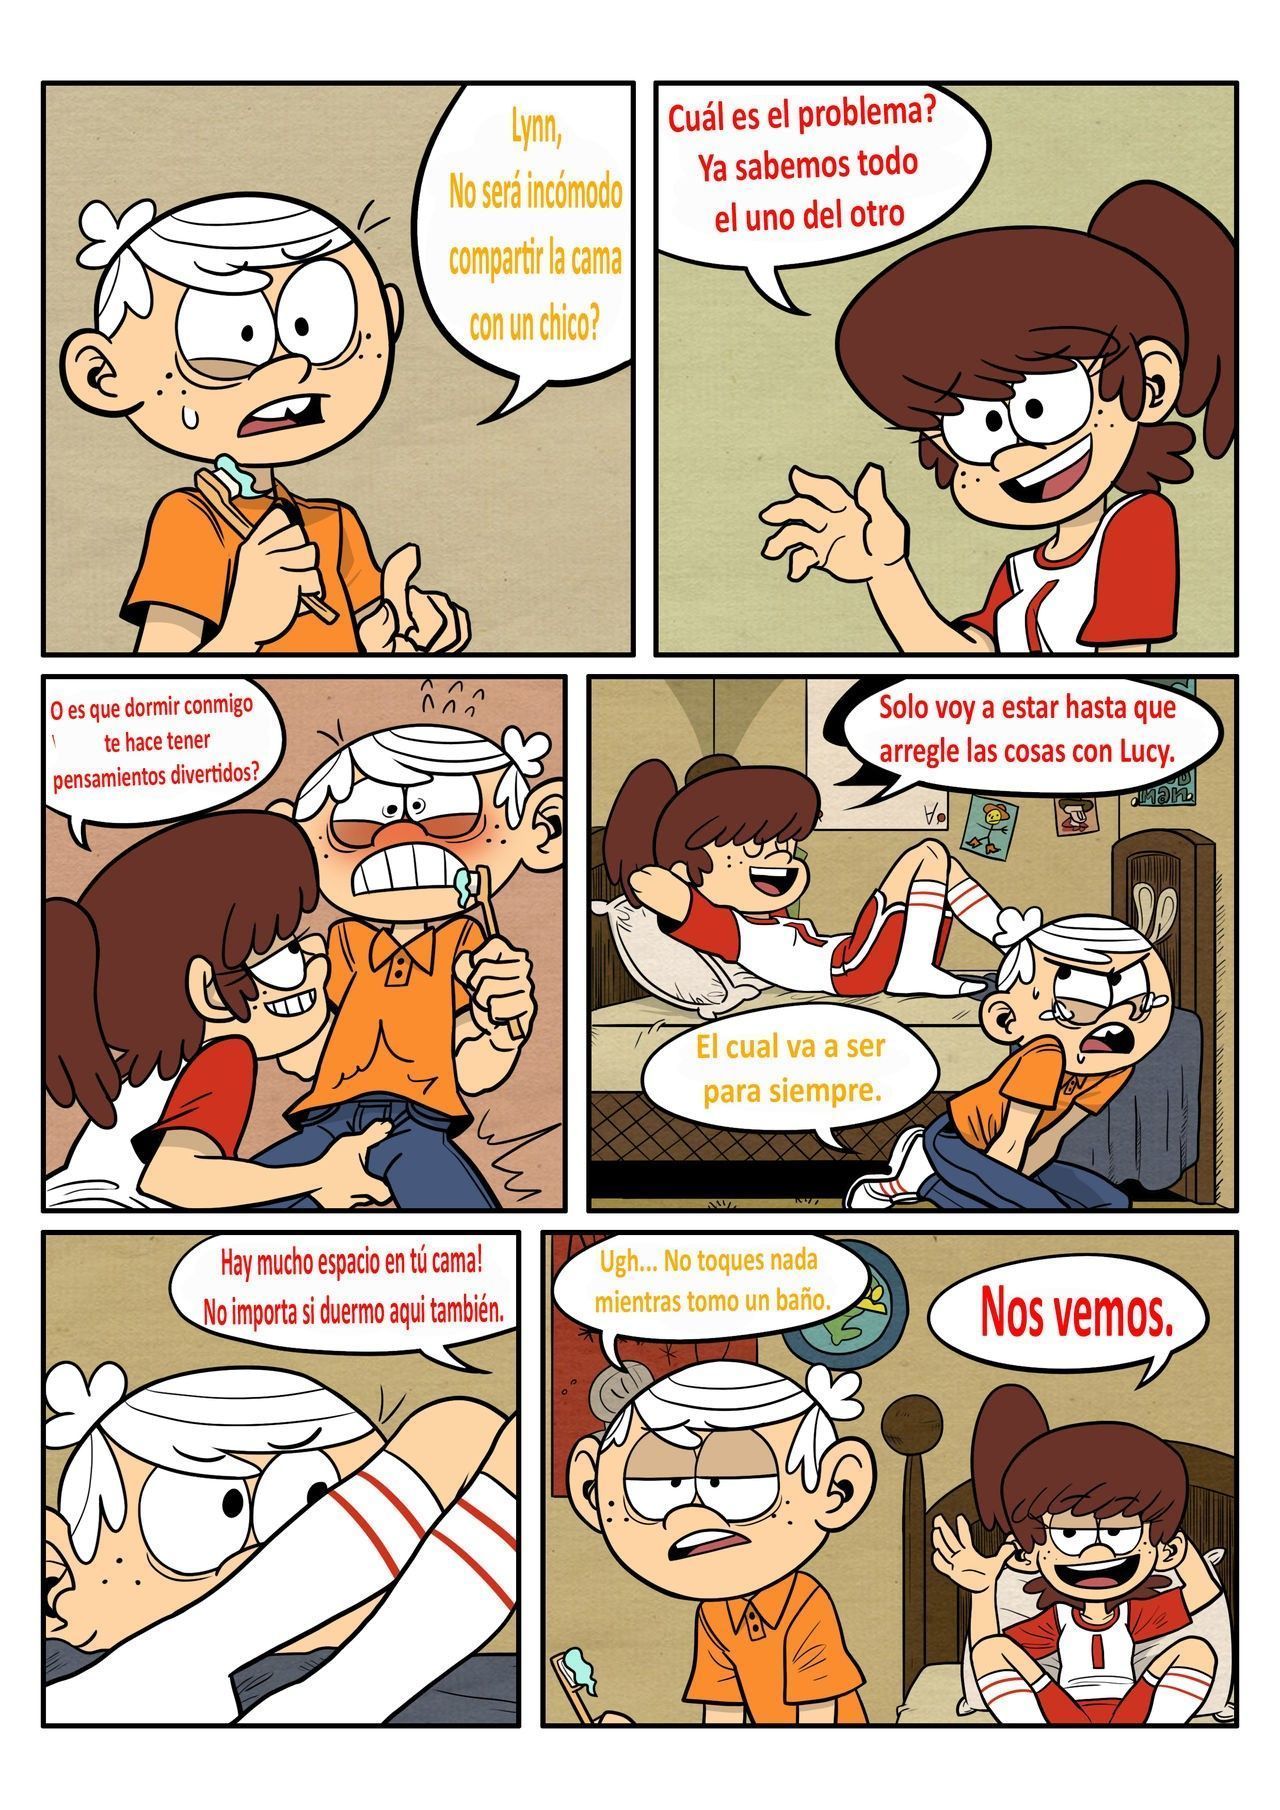 Governor reccomend the loud house